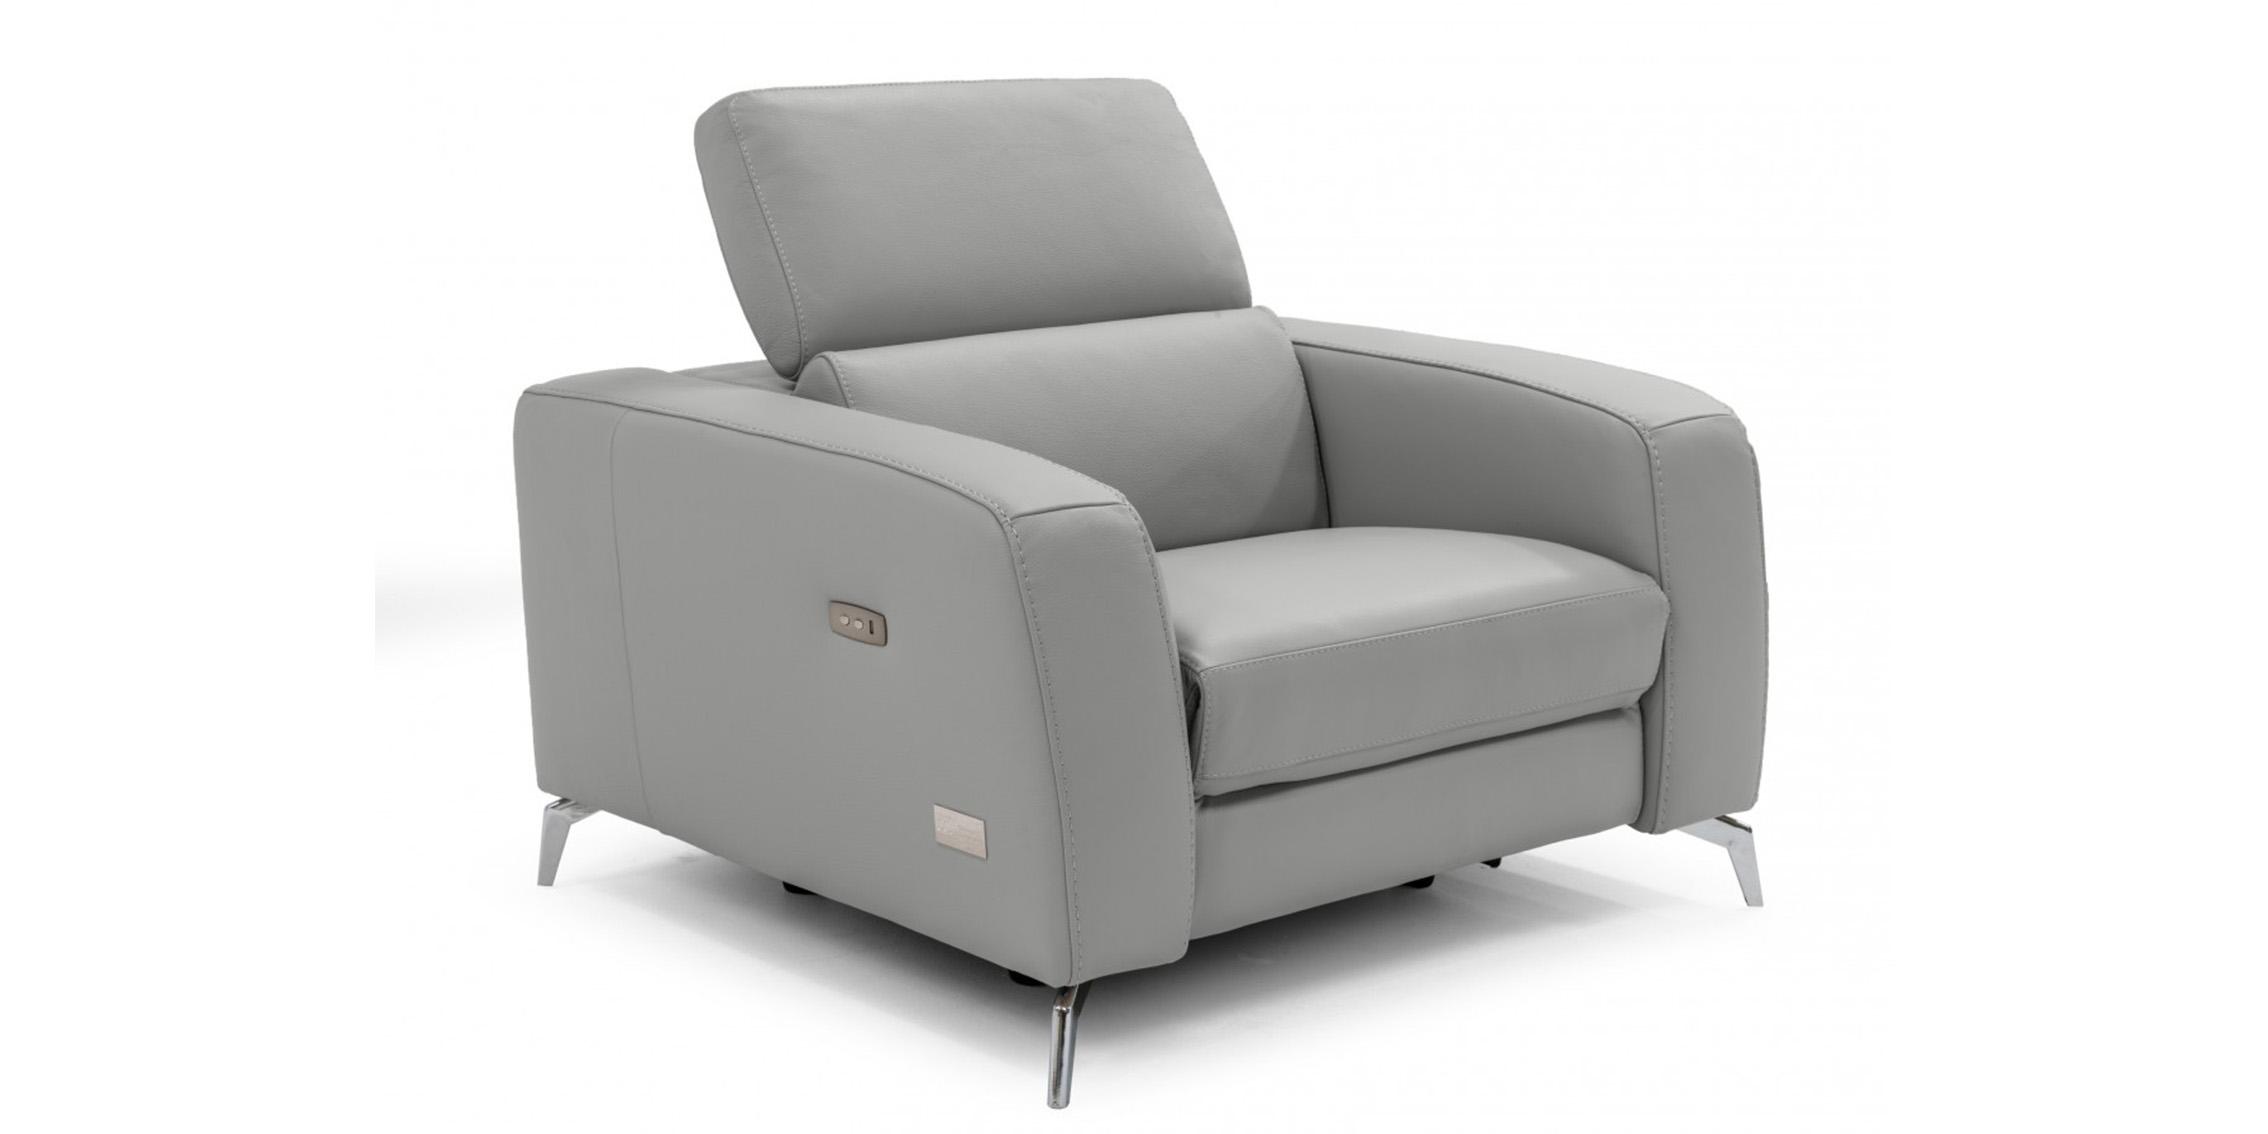 

    
VGCCROMA-SF-CER-GRY-S Recliner Sofa Set
